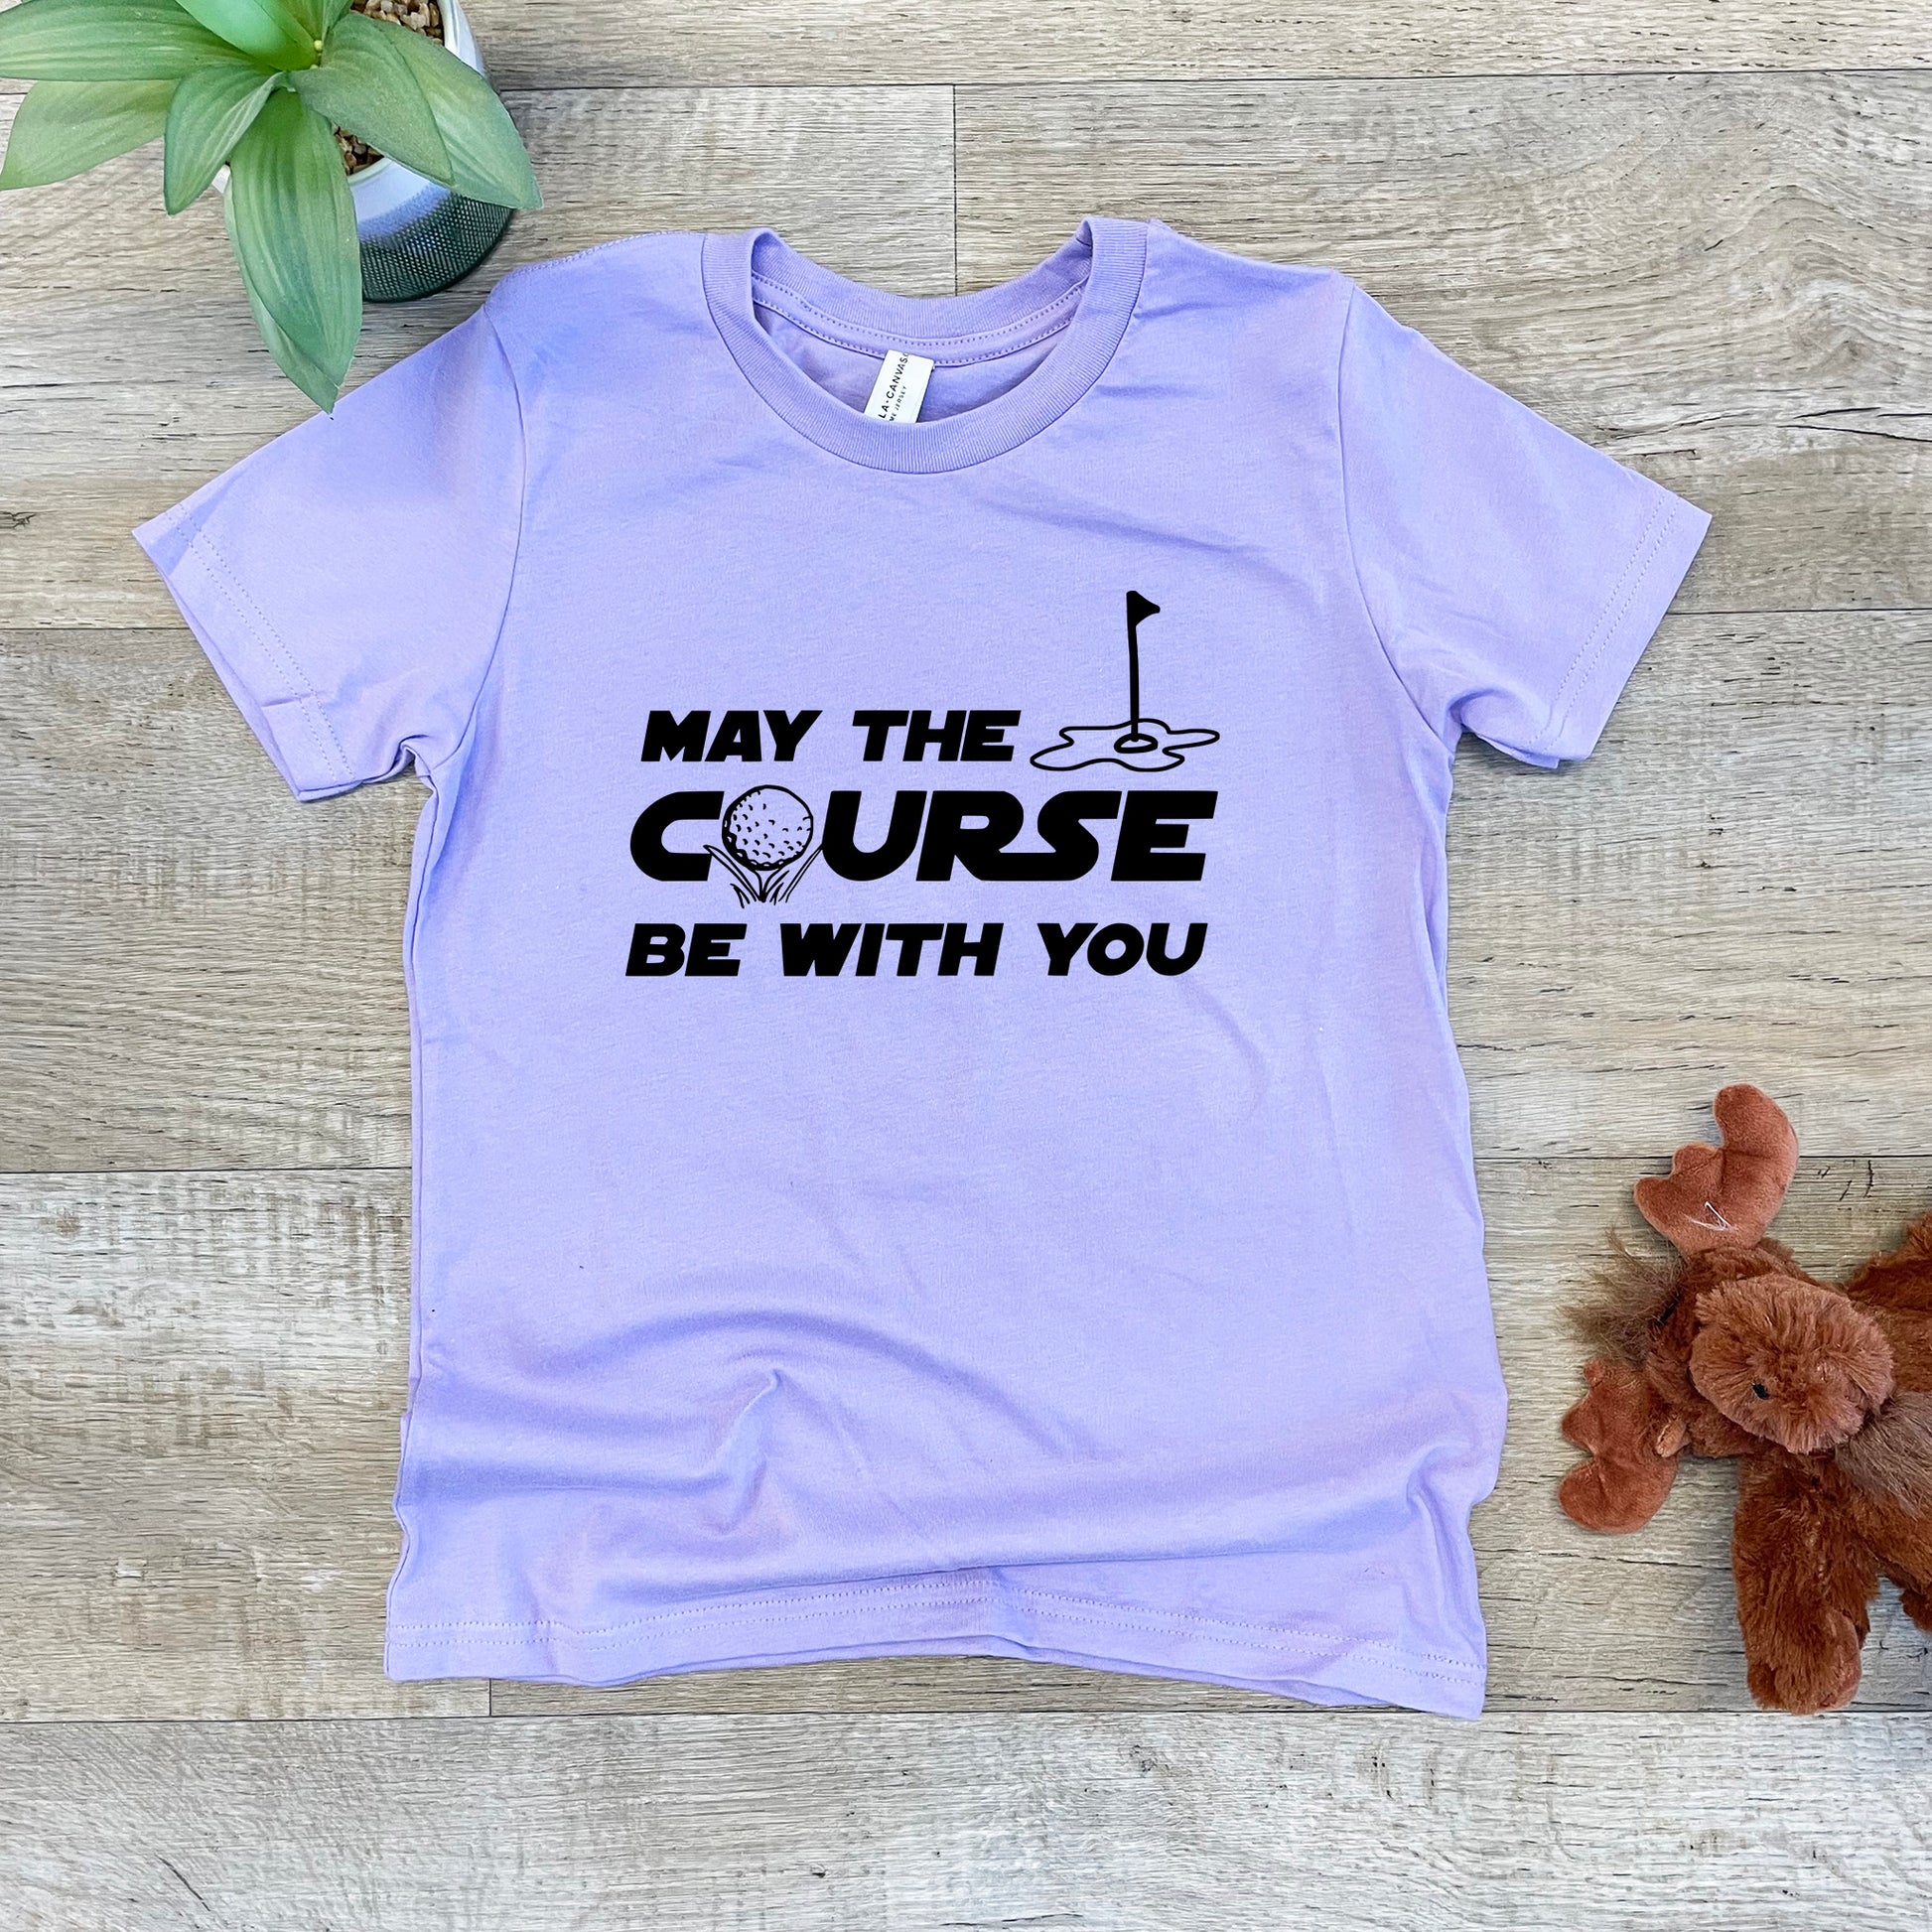 a t - shirt that says may the course be with you next to a teddy